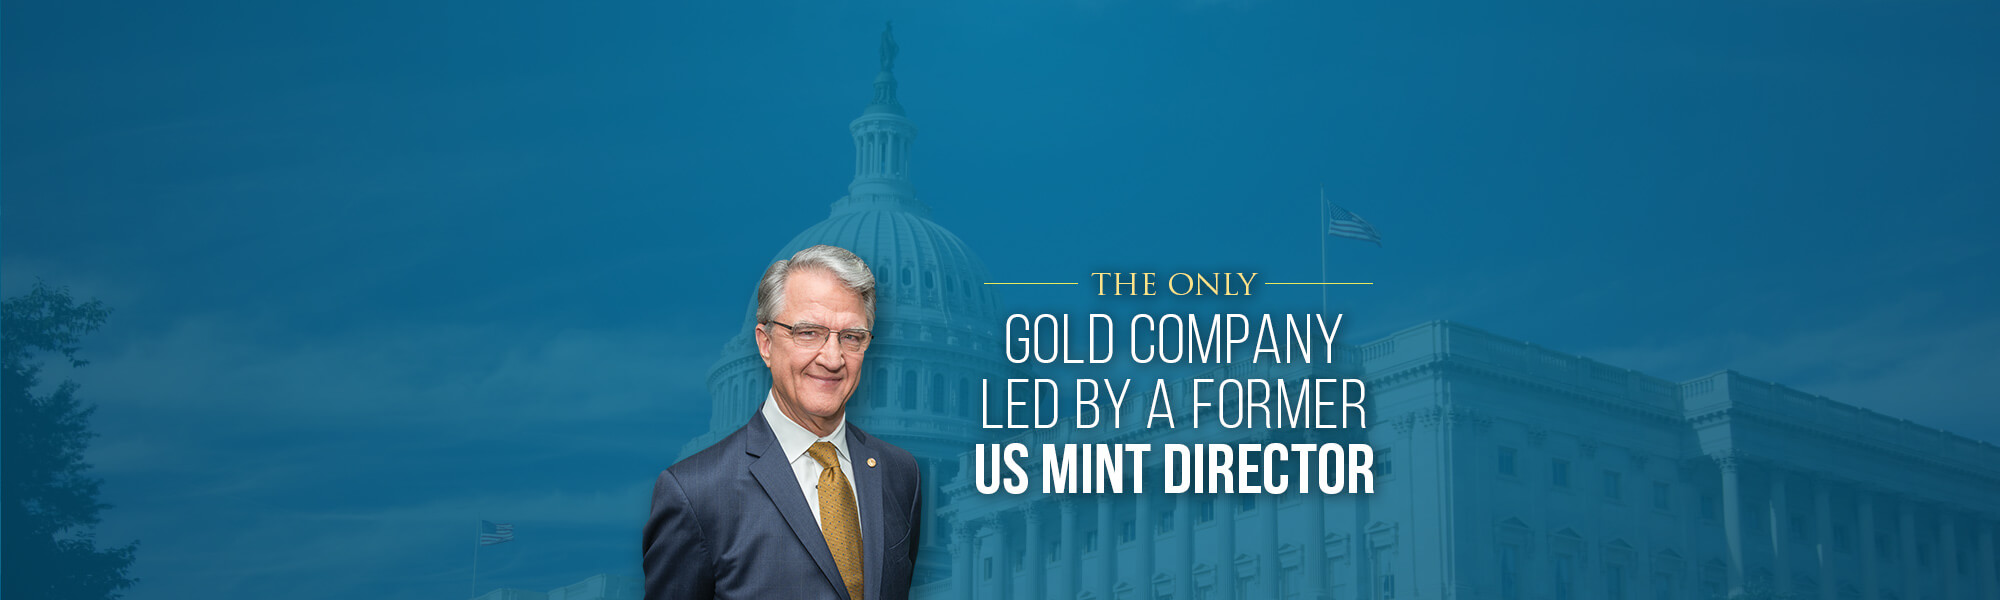 The Only Gold Company Led By a Former U.S. Mint Director